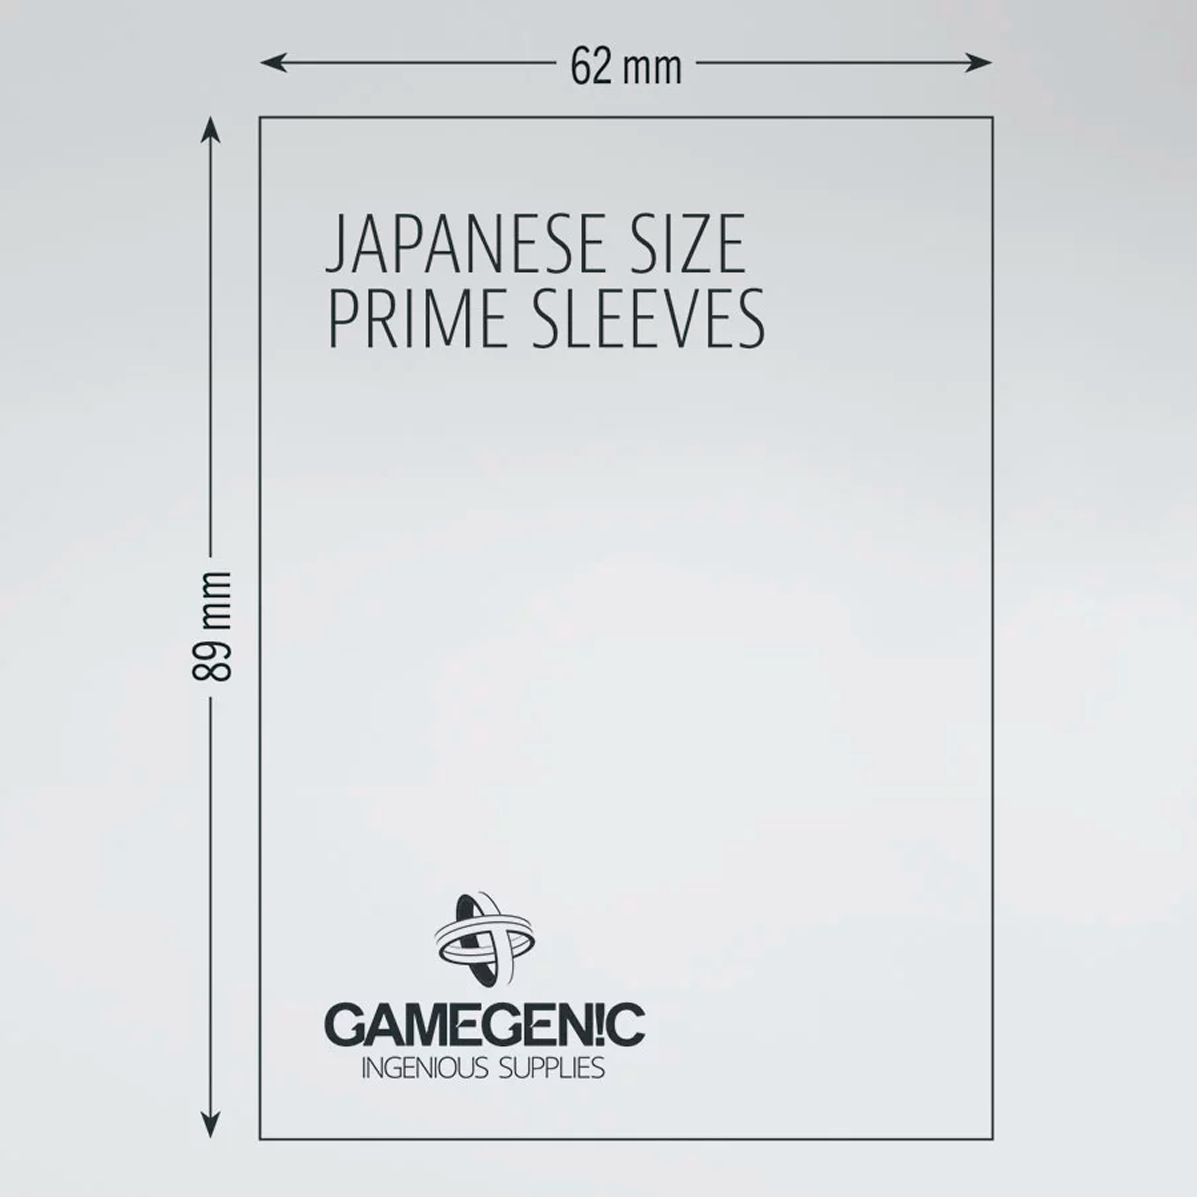 60 Sleeves Small Japanese Just 62 x 89 mm Gamegenic